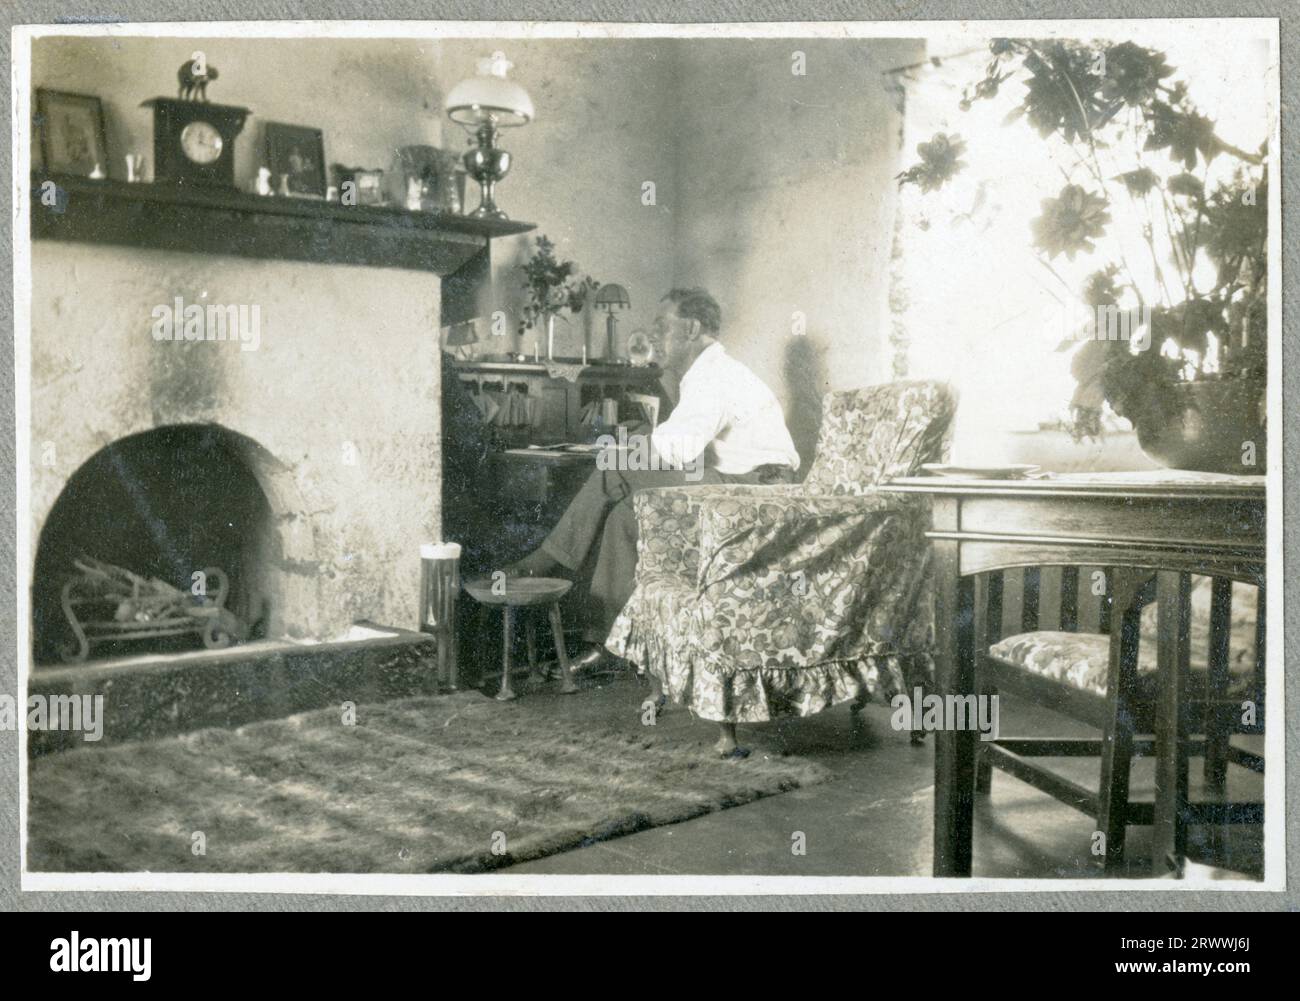 One of a series of five photos showing the interior of the Bungeys' Kabete sitting room, with large fireplace, writing desk, table and chairs. This image shows Charles Bungey sitting at the writing desk. A dog is asleep in front of the fireplace.  Original manuscript caption: Interior of Sitting Room, Kabete 1924. Stock Photo